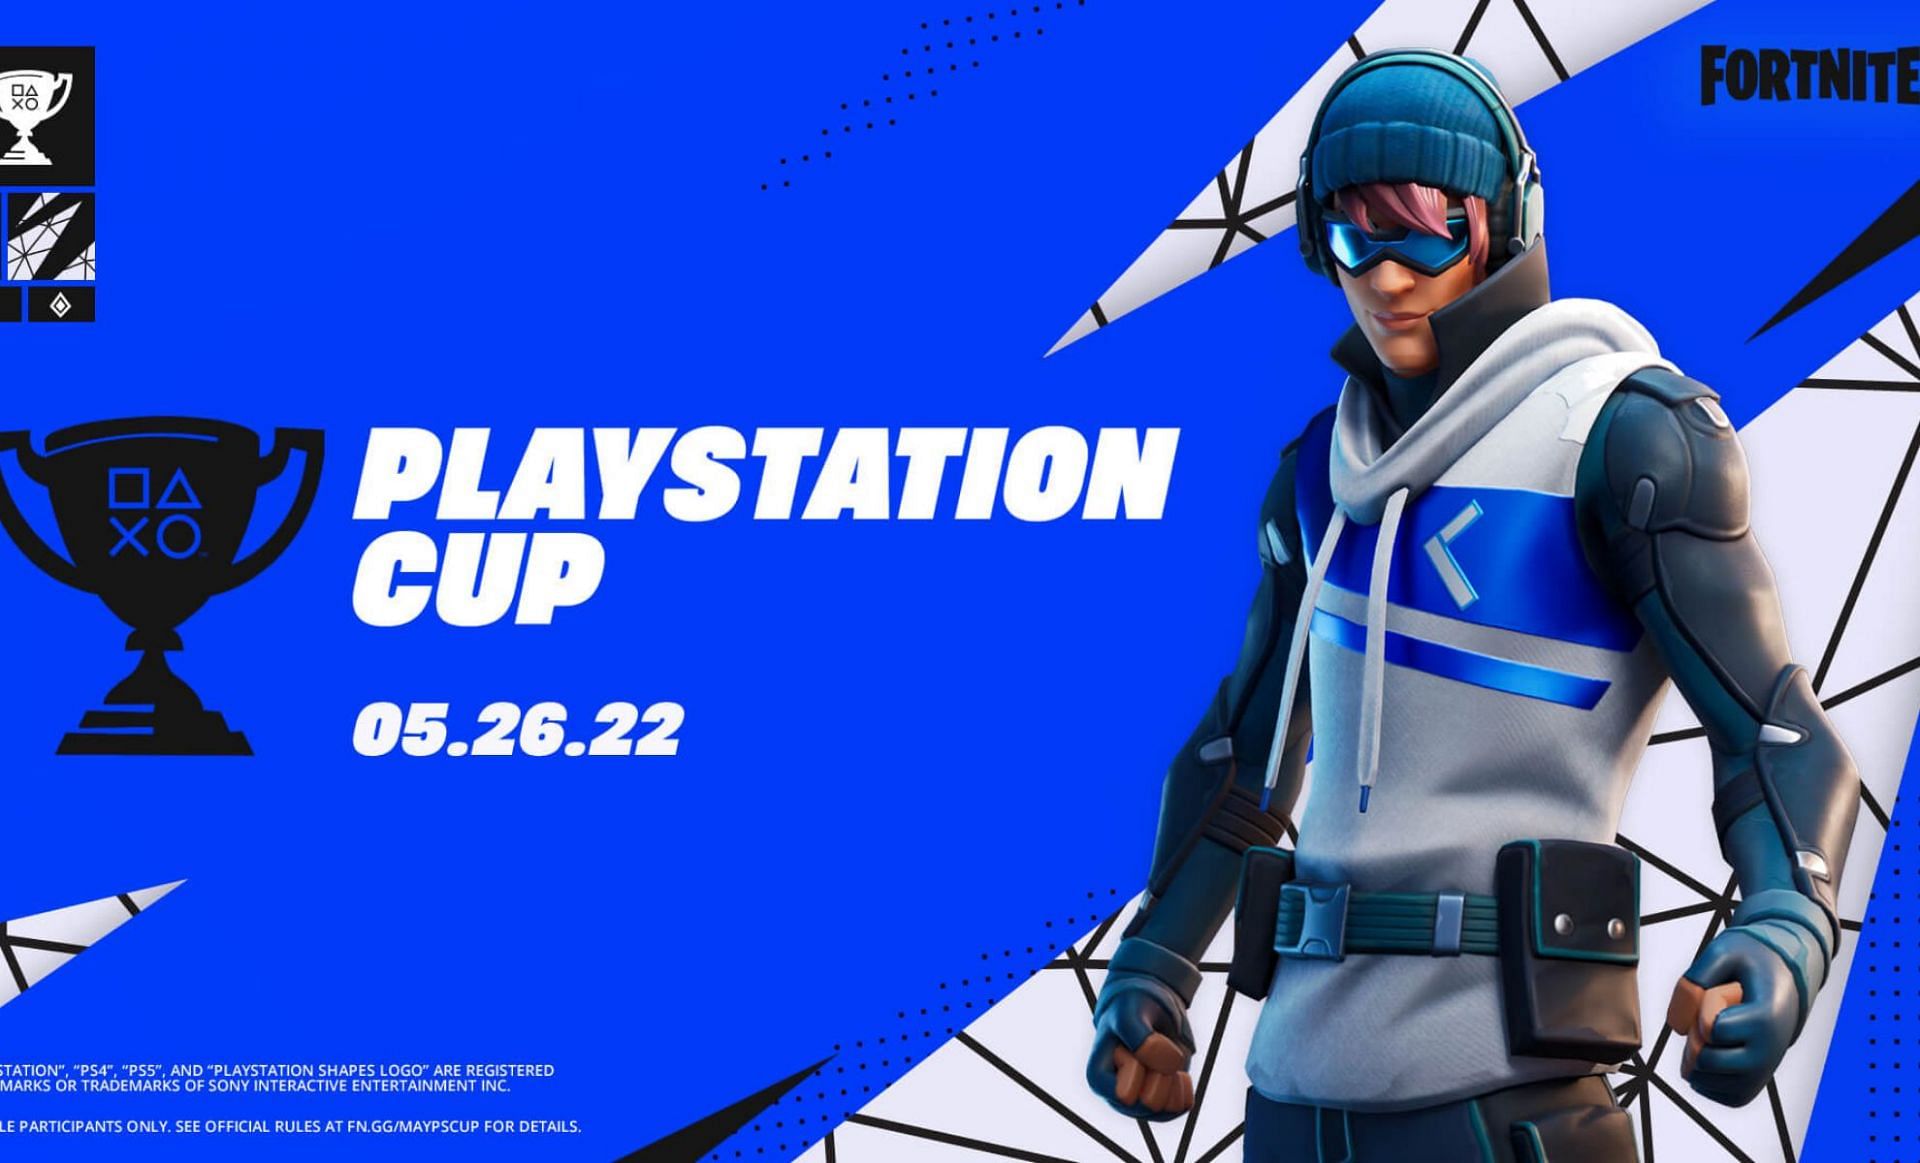 Fortnite Cup: Start Date, How to redeem free rewards, and